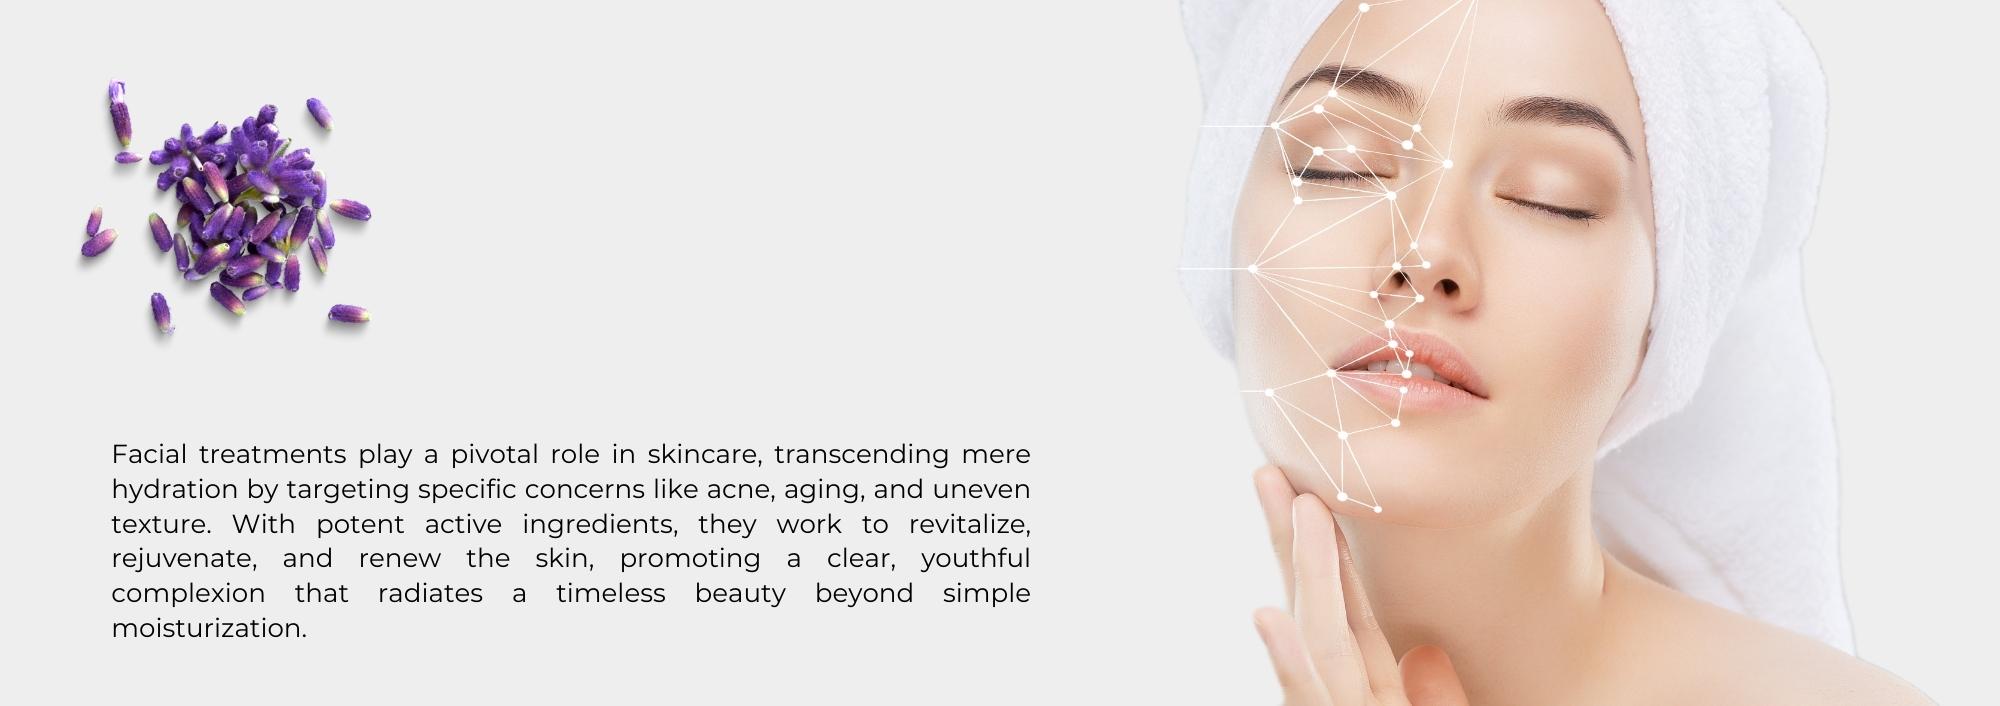 Facial treatments play a pivotal role in skincare, transcending mere hydration by targeting specific concerns like acne, aging, and uneven texture. With potent active ingredients, they work to revitalize, rejuvenate, and renew the skin, promoting a clear, youthful complexion that radiates a timeless beauty beyond simple moisturization.